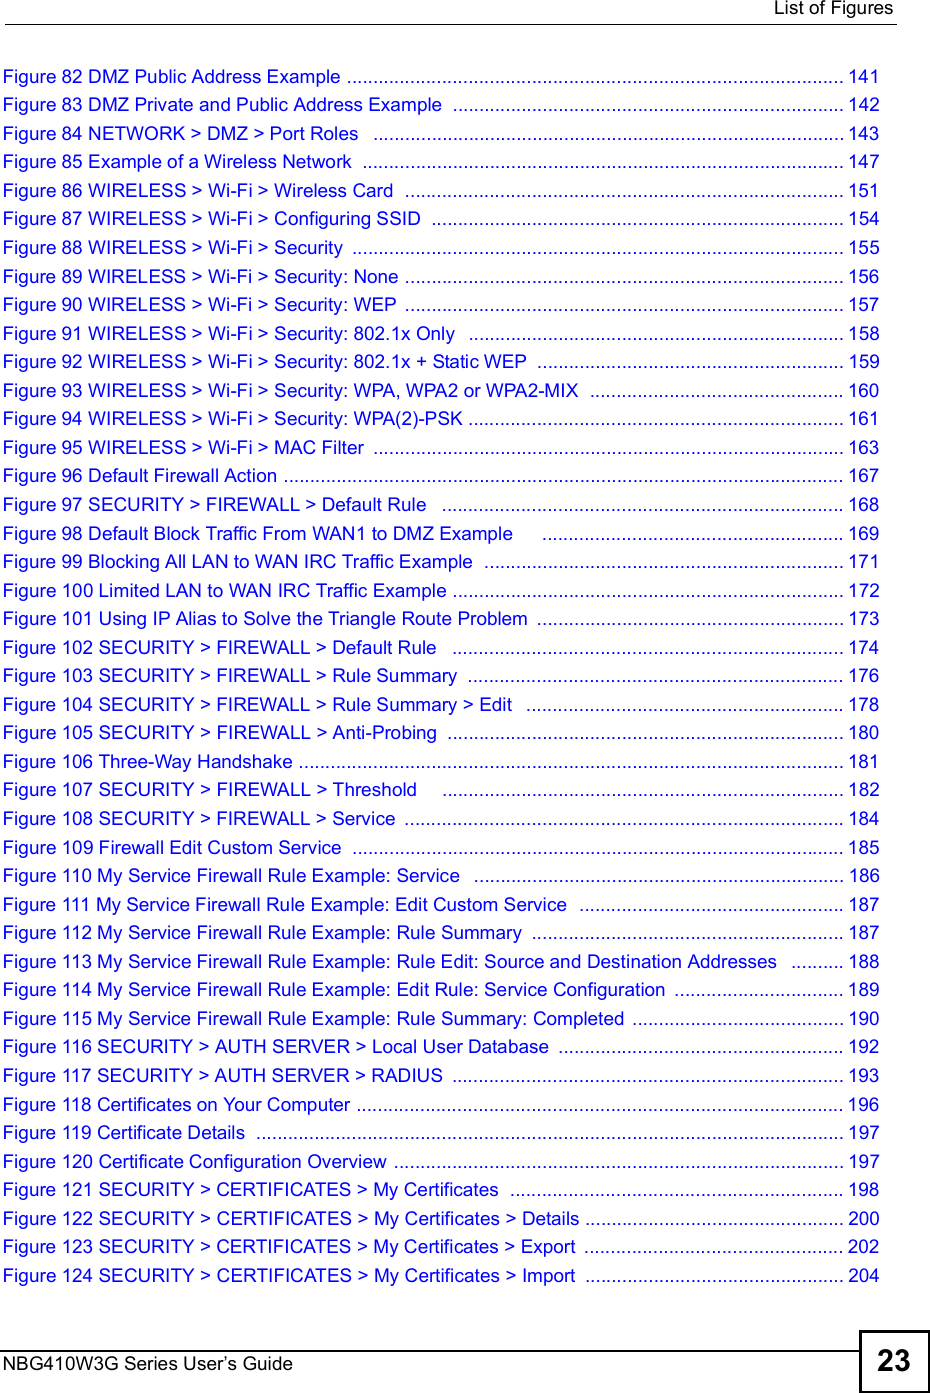  List of FiguresNBG410W3G Series User s Guide 23Figure 82 DMZ Public Address Example ..............................................................................................141Figure 83 DMZ Private and Public Address Example ..........................................................................142Figure 84 NETWORK &gt; DMZ &gt; Port Roles  .........................................................................................143Figure 85 Example of a Wireless Network ...........................................................................................147Figure 86 WIRELESS &gt; Wi-Fi &gt; Wireless Card  ...................................................................................151Figure 87 WIRELESS &gt; Wi-Fi &gt; Configuring SSID ..............................................................................154Figure 88 WIRELESS &gt; Wi-Fi &gt; Security .............................................................................................155Figure 89 WIRELESS &gt; Wi-Fi &gt; Security: None ...................................................................................156Figure 90 WIRELESS &gt; Wi-Fi &gt; Security: WEP ...................................................................................157Figure 91 WIRELESS &gt; Wi-Fi &gt; Security: 802.1x Only  .......................................................................158Figure 92 WIRELESS &gt; Wi-Fi &gt; Security: 802.1x + Static WEP ..........................................................159Figure 93 WIRELESS &gt; Wi-Fi &gt; Security: WPA, WPA2 or WPA2-MIX  ................................................160Figure 94 WIRELESS &gt; Wi-Fi &gt; Security: WPA(2)-PSK .......................................................................161Figure 95 WIRELESS &gt; Wi-Fi &gt; MAC Filter .........................................................................................163Figure 96 Default Firewall Action ..........................................................................................................167Figure 97 SECURITY &gt; FIREWALL &gt; Default Rule  ............................................................................168Figure 98 Default Block Traffic From WAN1 to DMZ Example     .........................................................169Figure 99 Blocking All LAN to WAN IRC Traffic Example  ....................................................................171Figure 100 Limited LAN to WAN IRC Traffic Example ..........................................................................172Figure 101 Using IP Alias to Solve the Triangle Route Problem ..........................................................173Figure 102 SECURITY &gt; FIREWALL &gt; Default Rule  ..........................................................................174Figure 103 SECURITY &gt; FIREWALL &gt; Rule Summary .......................................................................176Figure 104 SECURITY &gt; FIREWALL &gt; Rule Summary &gt; Edit  ............................................................178Figure 105 SECURITY &gt; FIREWALL &gt; Anti-Probing ...........................................................................180Figure 106 Three-Way Handshake .......................................................................................................181Figure 107 SECURITY &gt; FIREWALL &gt; Threshold    ............................................................................182Figure 108 SECURITY &gt; FIREWALL &gt; Service ...................................................................................184Figure 109 Firewall Edit Custom Service .............................................................................................185Figure 110 My Service Firewall Rule Example: Service  ......................................................................186Figure 111 My Service Firewall Rule Example: Edit Custom Service  ..................................................187Figure 112 My Service Firewall Rule Example: Rule Summary ...........................................................187Figure 113 My Service Firewall Rule Example: Rule Edit: Source and Destination Addresses  ..........188Figure 114 My Service Firewall Rule Example: Edit Rule: Service Configuration ................................189Figure 115 My Service Firewall Rule Example: Rule Summary: Completed ........................................190Figure 116 SECURITY &gt; AUTH SERVER &gt; Local User Database ......................................................192Figure 117 SECURITY &gt; AUTH SERVER &gt; RADIUS ..........................................................................193Figure 118 Certificates on Your Computer ............................................................................................196Figure 119 Certificate Details  ...............................................................................................................197Figure 120 Certificate Configuration Overview .....................................................................................197Figure 121 SECURITY &gt; CERTIFICATES &gt; My Certificates  ...............................................................198Figure 122 SECURITY &gt; CERTIFICATES &gt; My Certificates &gt; Details .................................................200Figure 123 SECURITY &gt; CERTIFICATES &gt; My Certificates &gt; Export .................................................202Figure 124 SECURITY &gt; CERTIFICATES &gt; My Certificates &gt; Import .................................................204